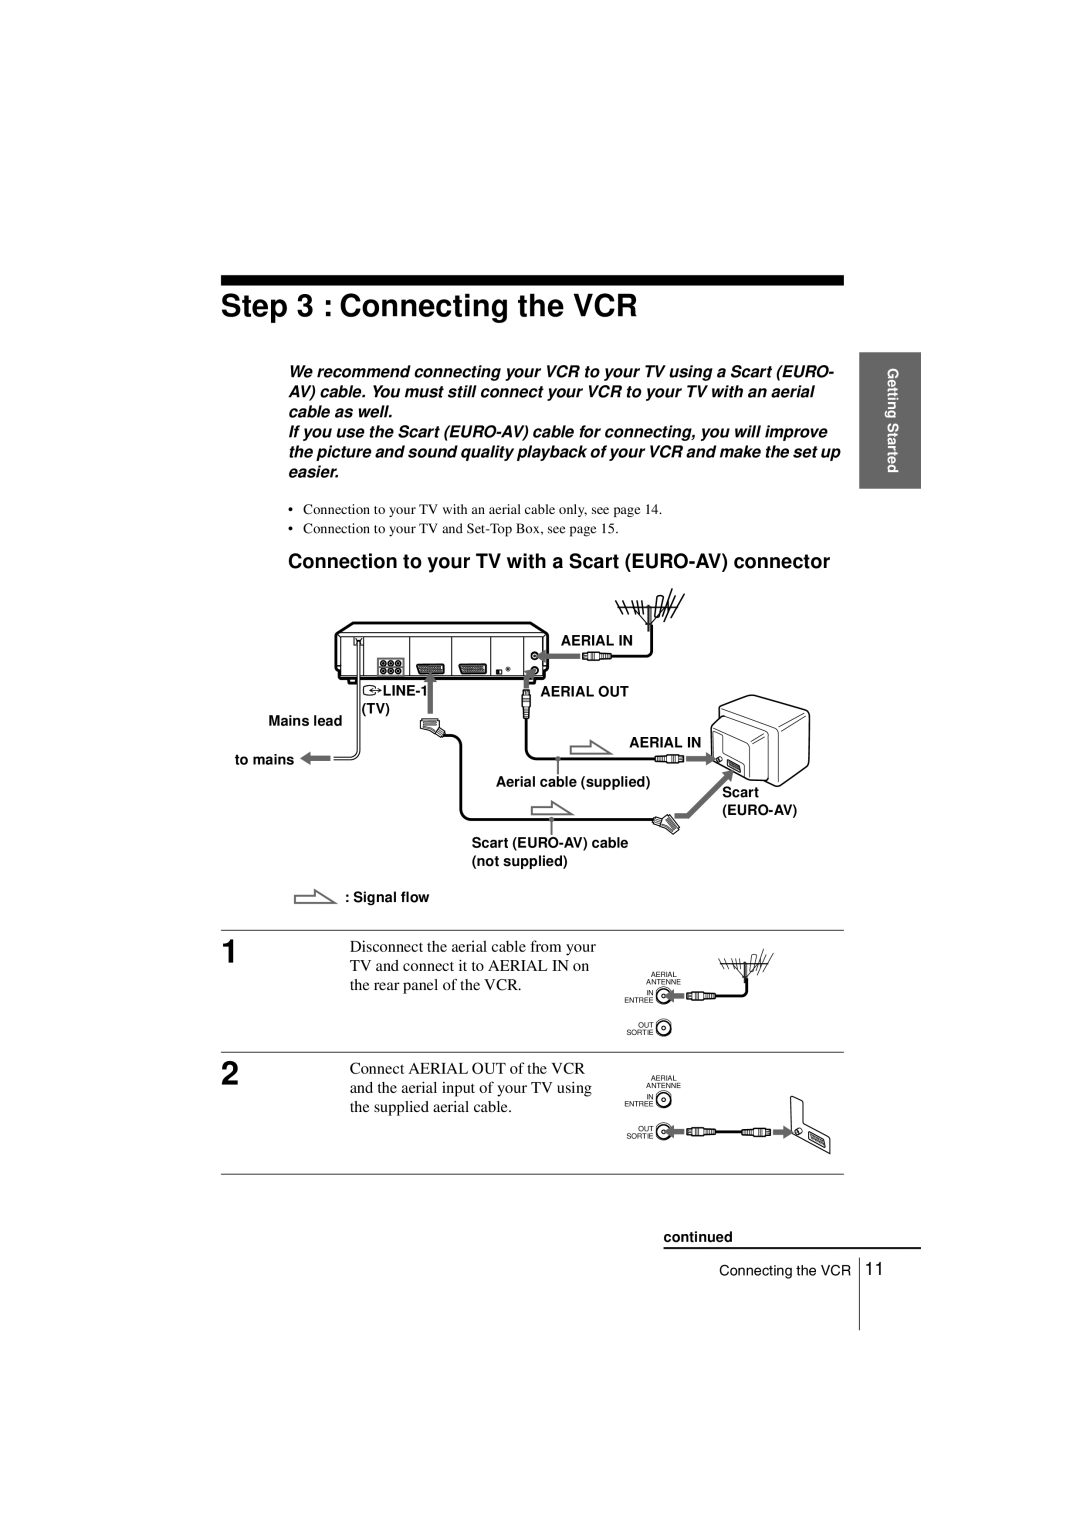 Sony SLV-SF990G manual Connecting the VCR, Connection to your TV with a Scart EURO-AV connector 